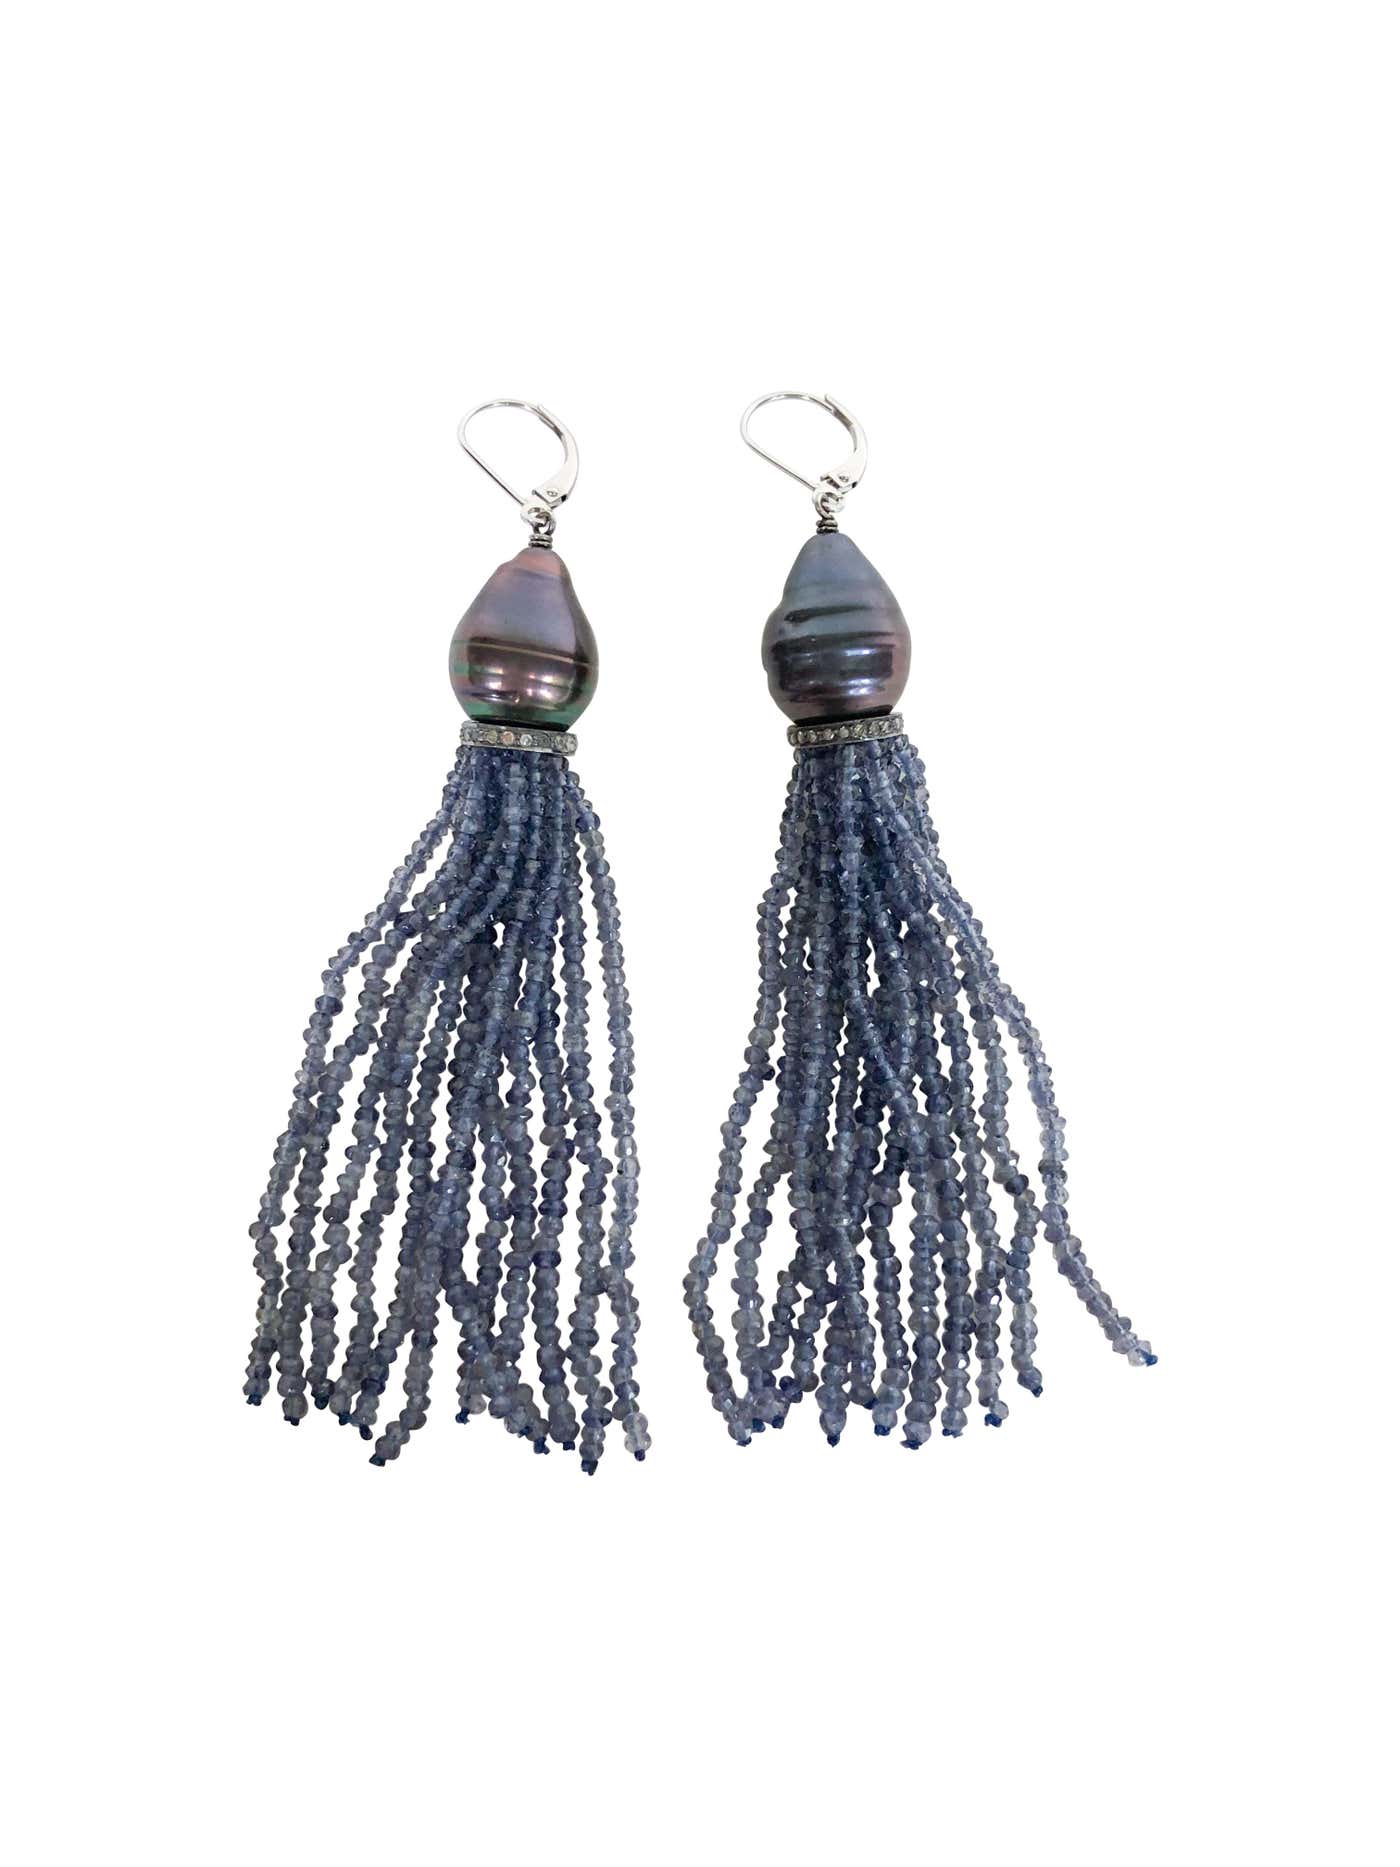 Baroque Black Pearl & Iolite Bead Tassel Earrings with Silver and Gold